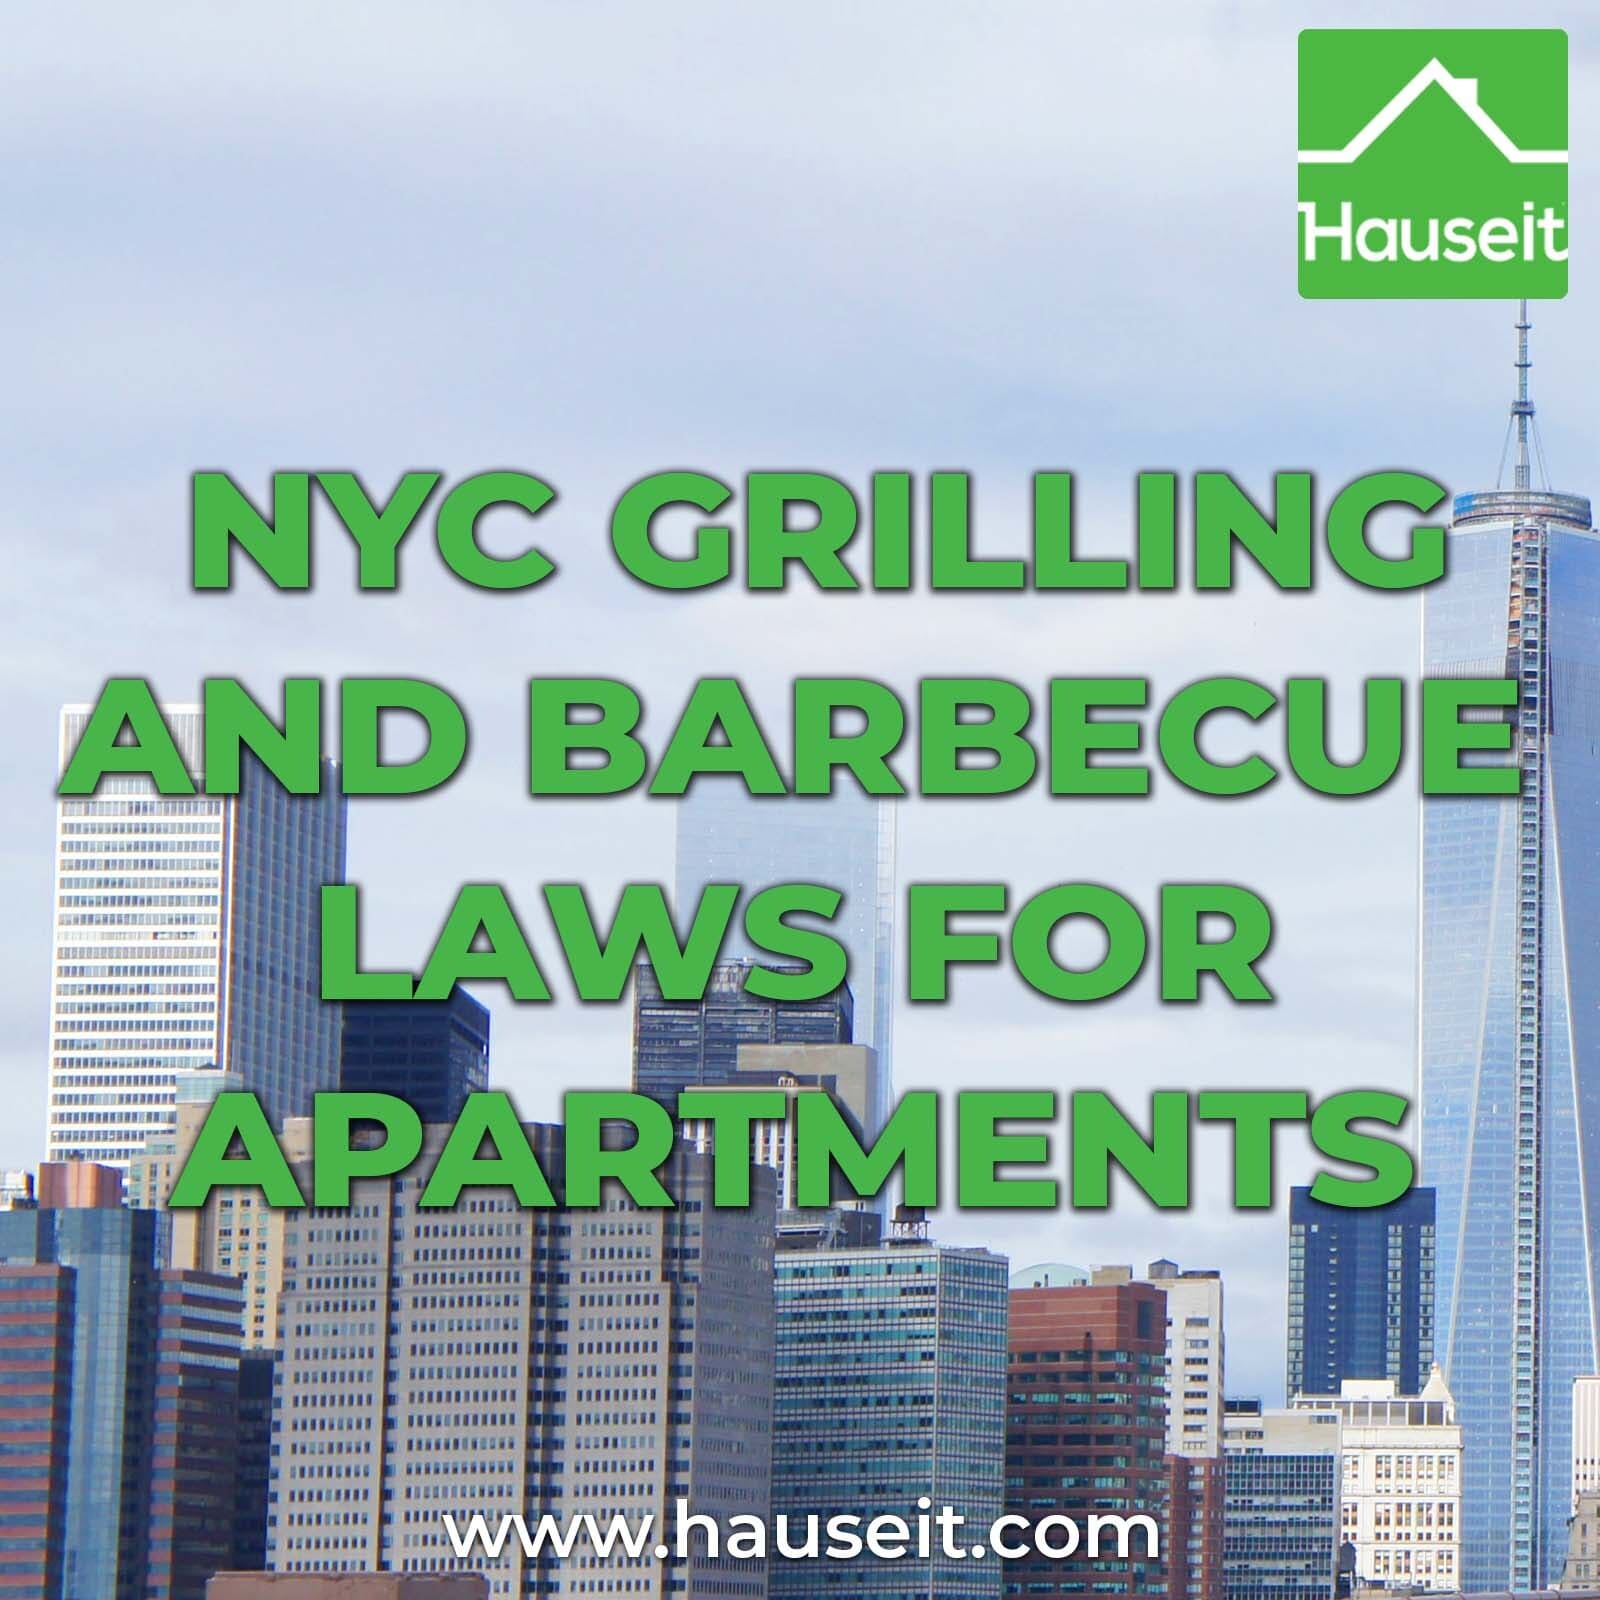 Nyc Grilling And Barbecue Laws For, Is Propane Fire Pit Legal In Nyc